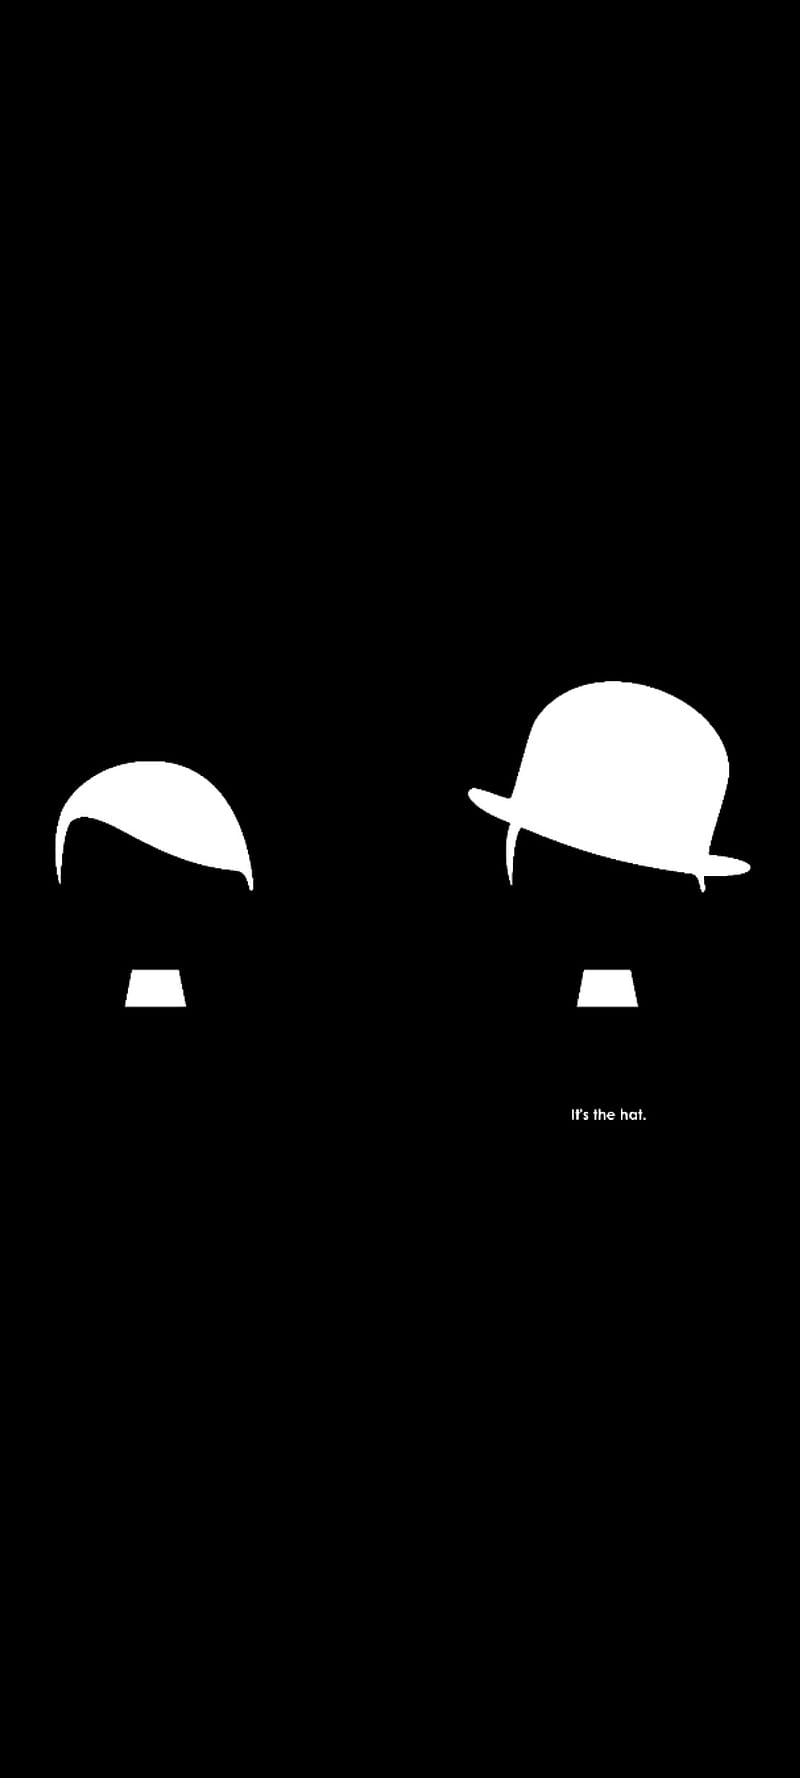 Difference is Hat, charlie chaplin, HD phone wallpaper